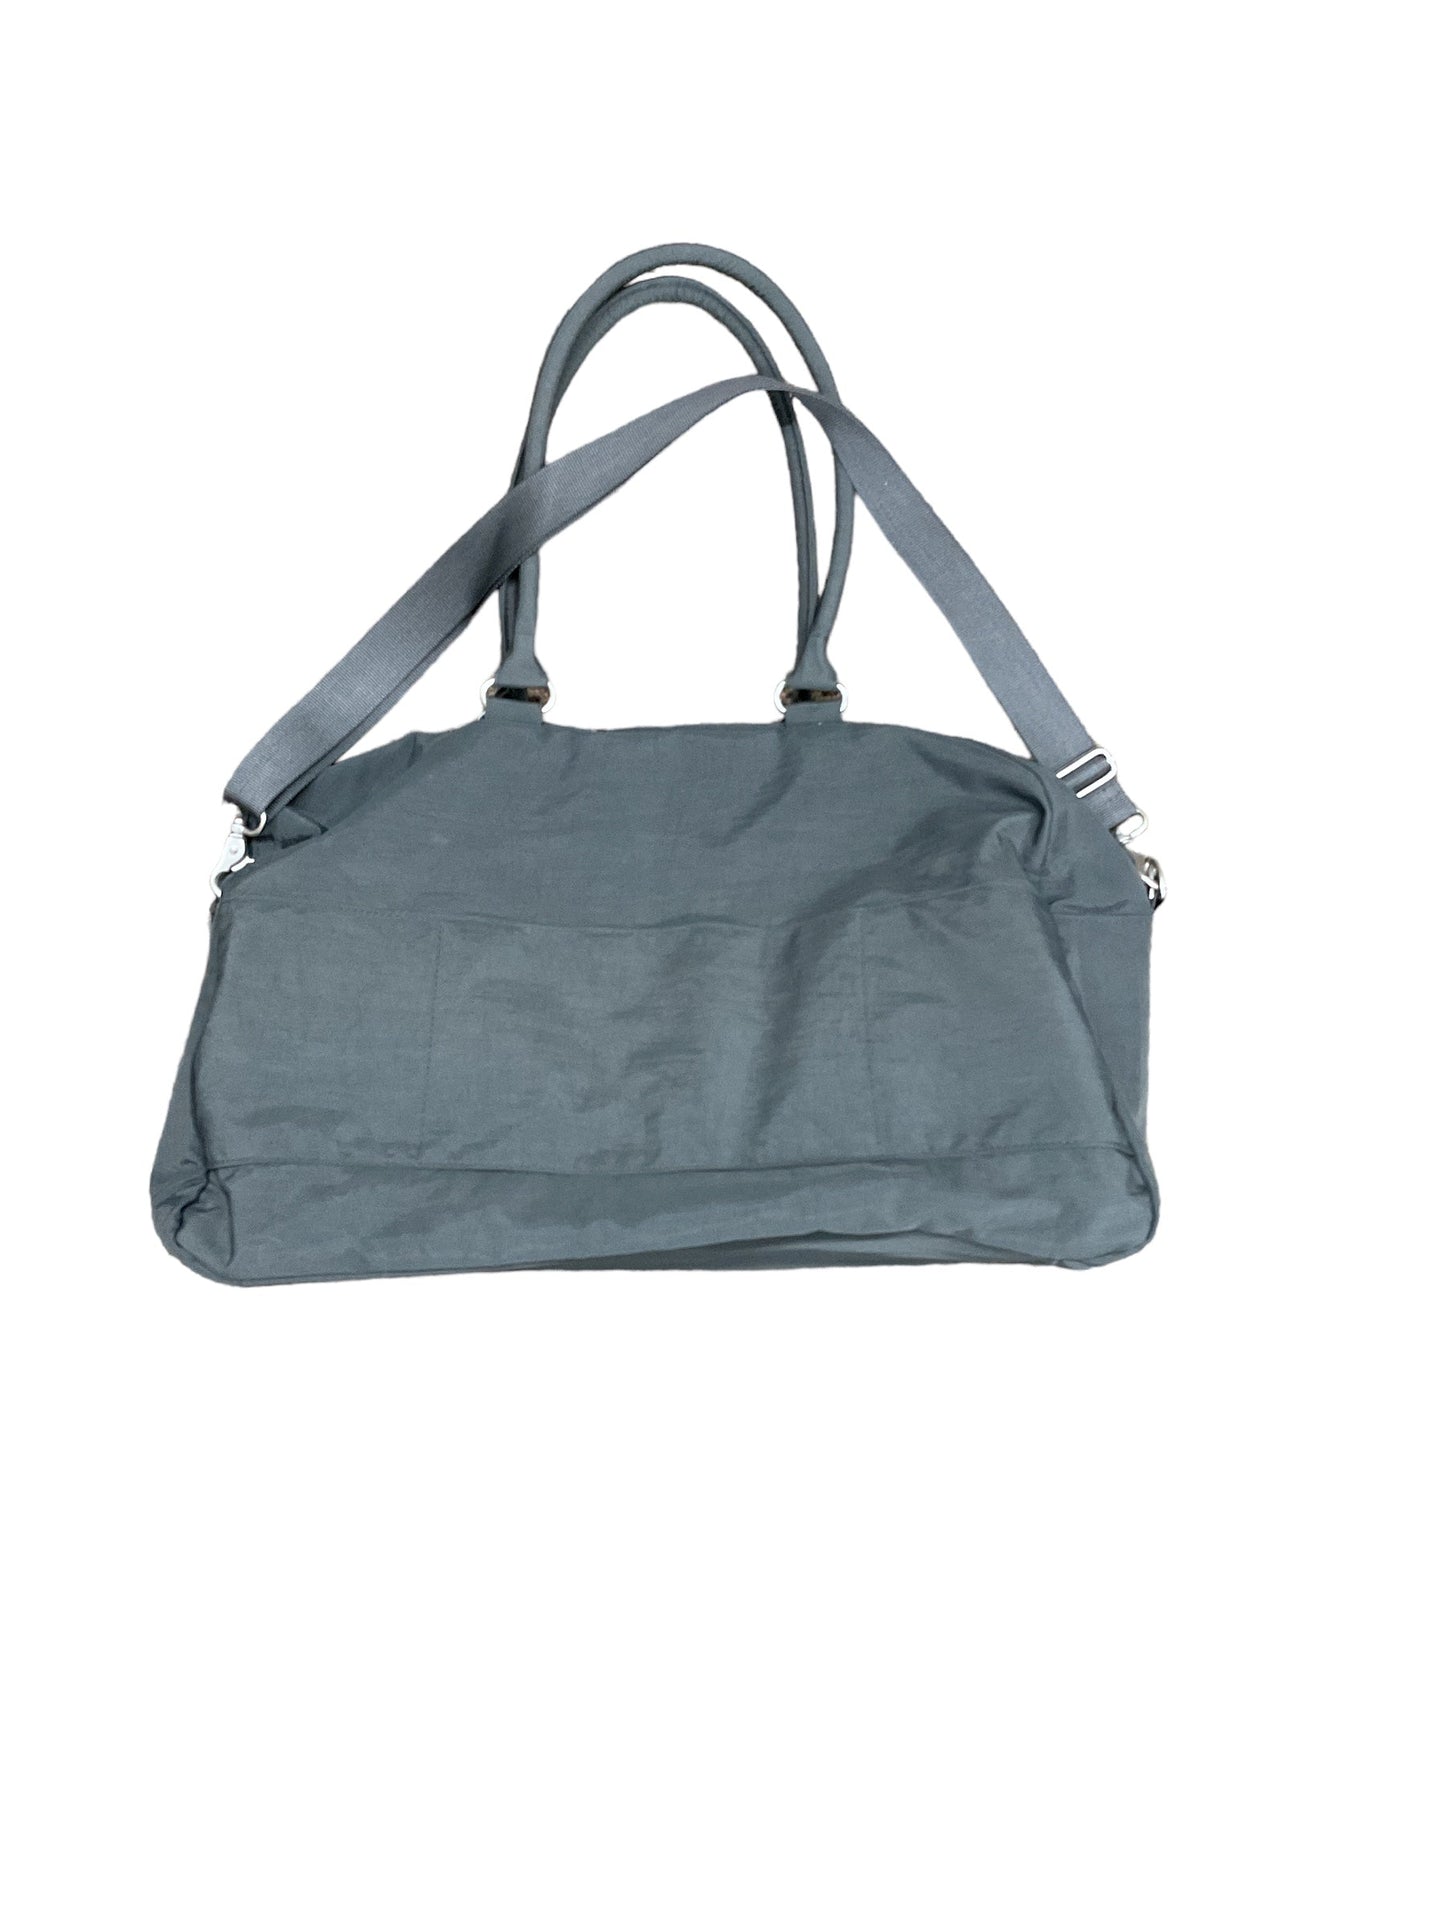 Duffle And Weekender By Baggallini  Size: Medium